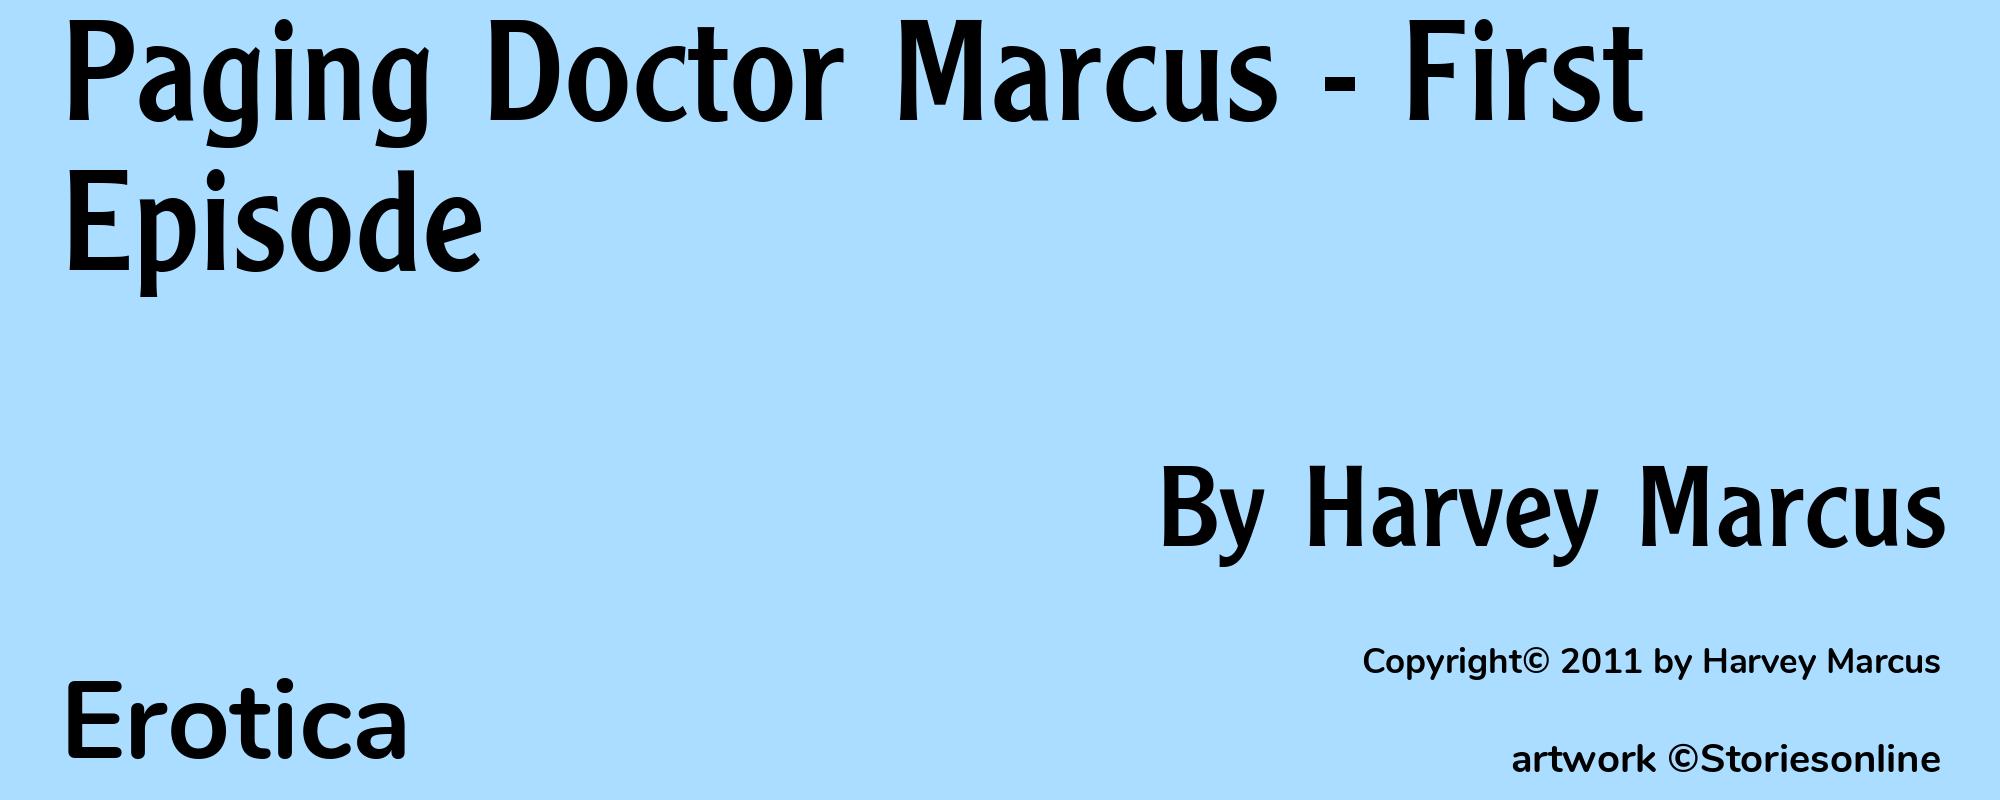 Paging Doctor Marcus - First Episode - Cover